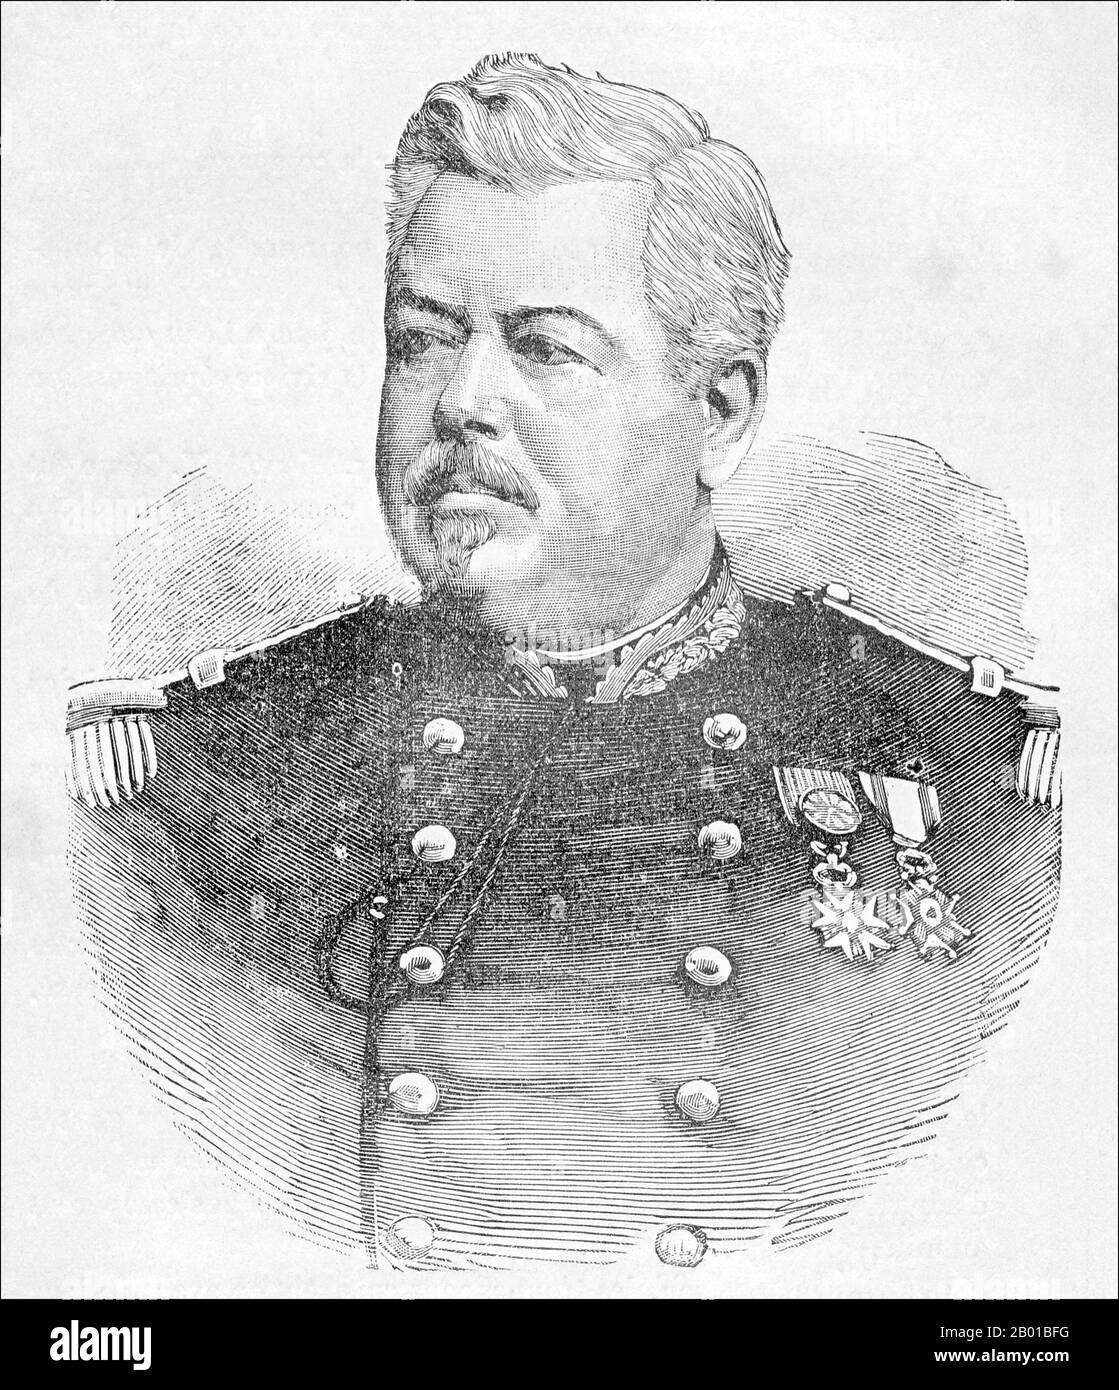 Vietnam/France: General Charles-Théodore Millot (28 June 1829 - 17 May 1889), general-in-chief of the Tonkin Expeditionary Corps (r. 1884). Engraving, 1886.  The Tonkin Campaign (French: Campagne du Tonkin) was an armed conflict fought between June 1883 and April 1886 by the French against, variously, the Vietnamese, Liu Yongfu's Black Flag Army and the Chinese Guangxi and Yunnan armies to occupy Tonkin (northern Vietnam) and entrench a French protectorate there. Stock Photo